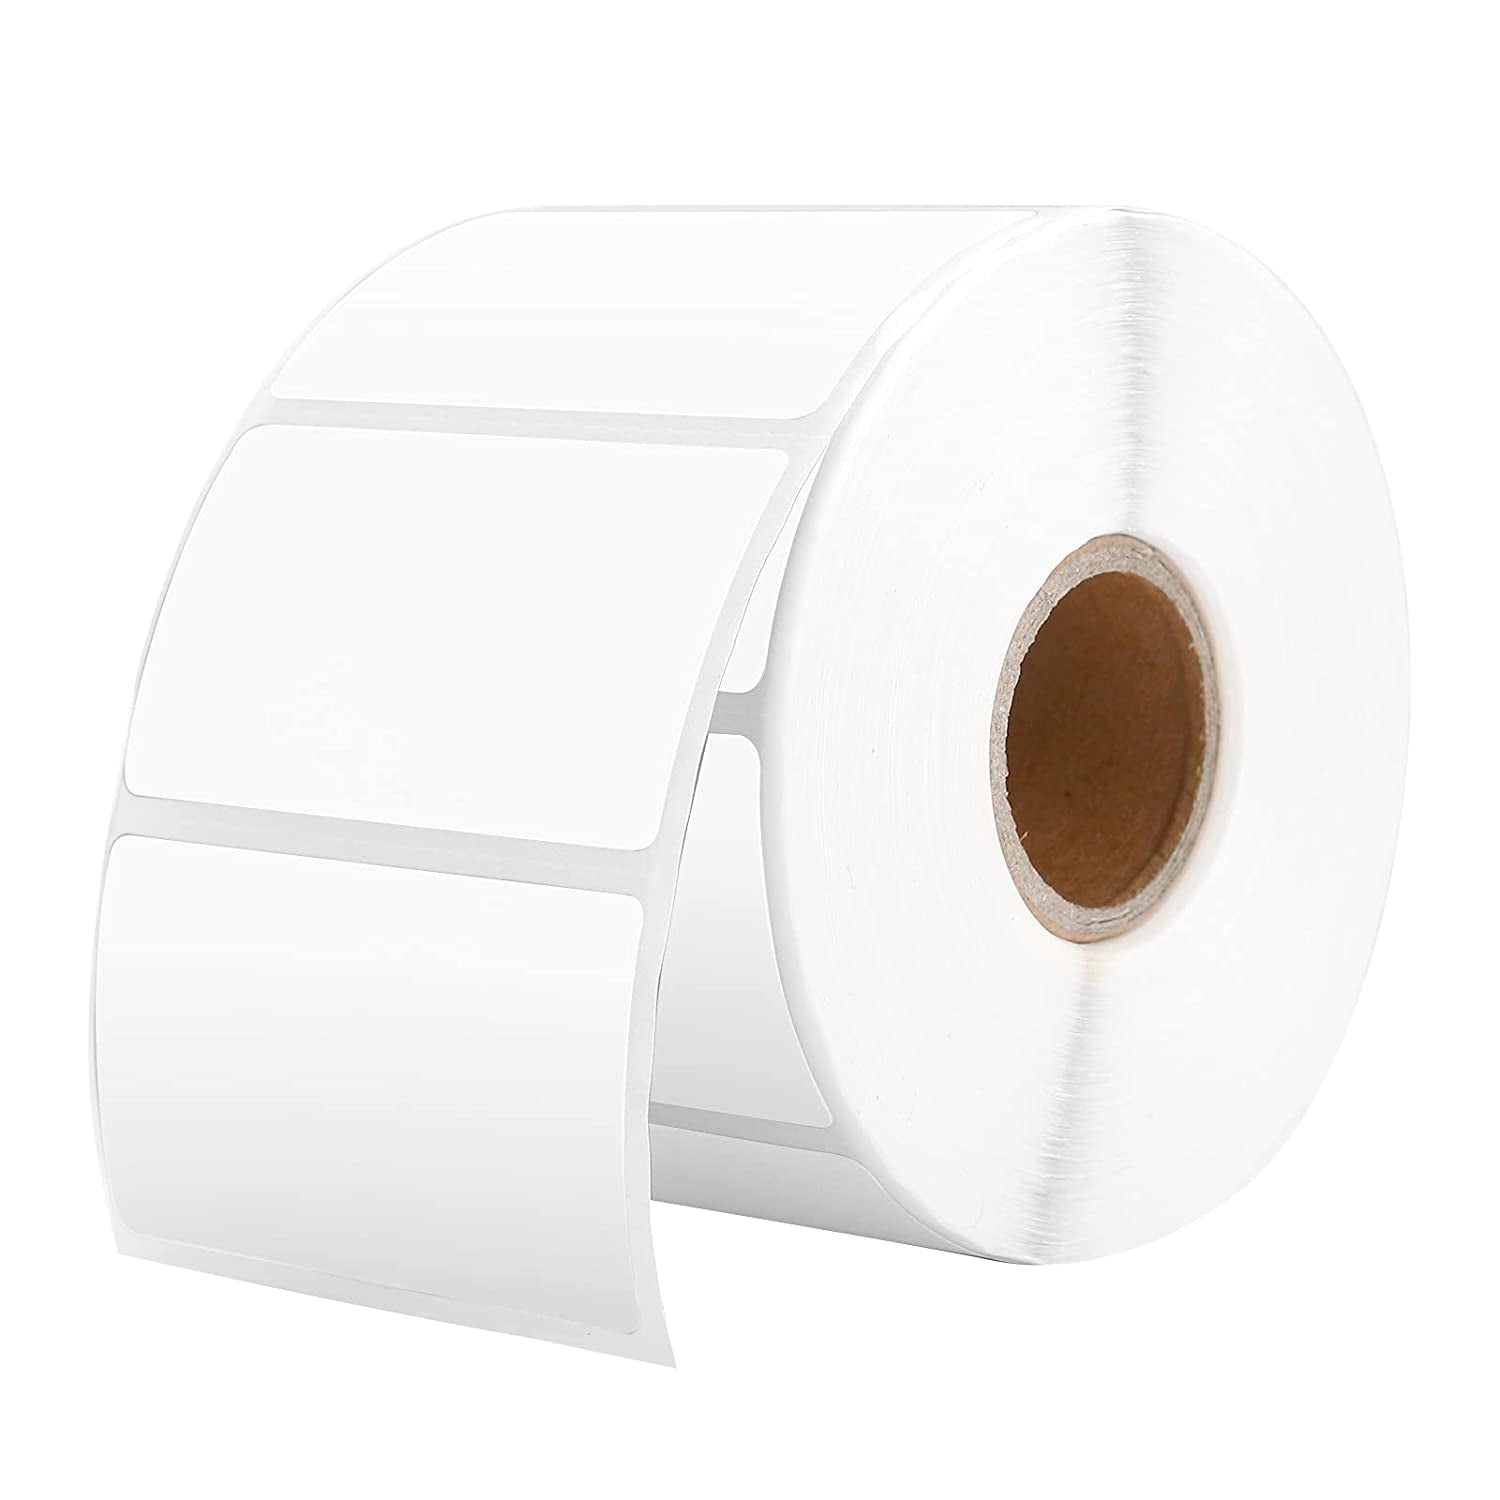 MUNBYN 4x6 Thermal Direct Shipping Labels, 500 Labels Roll ,Waterproof Self  Adhesive Stickers White 